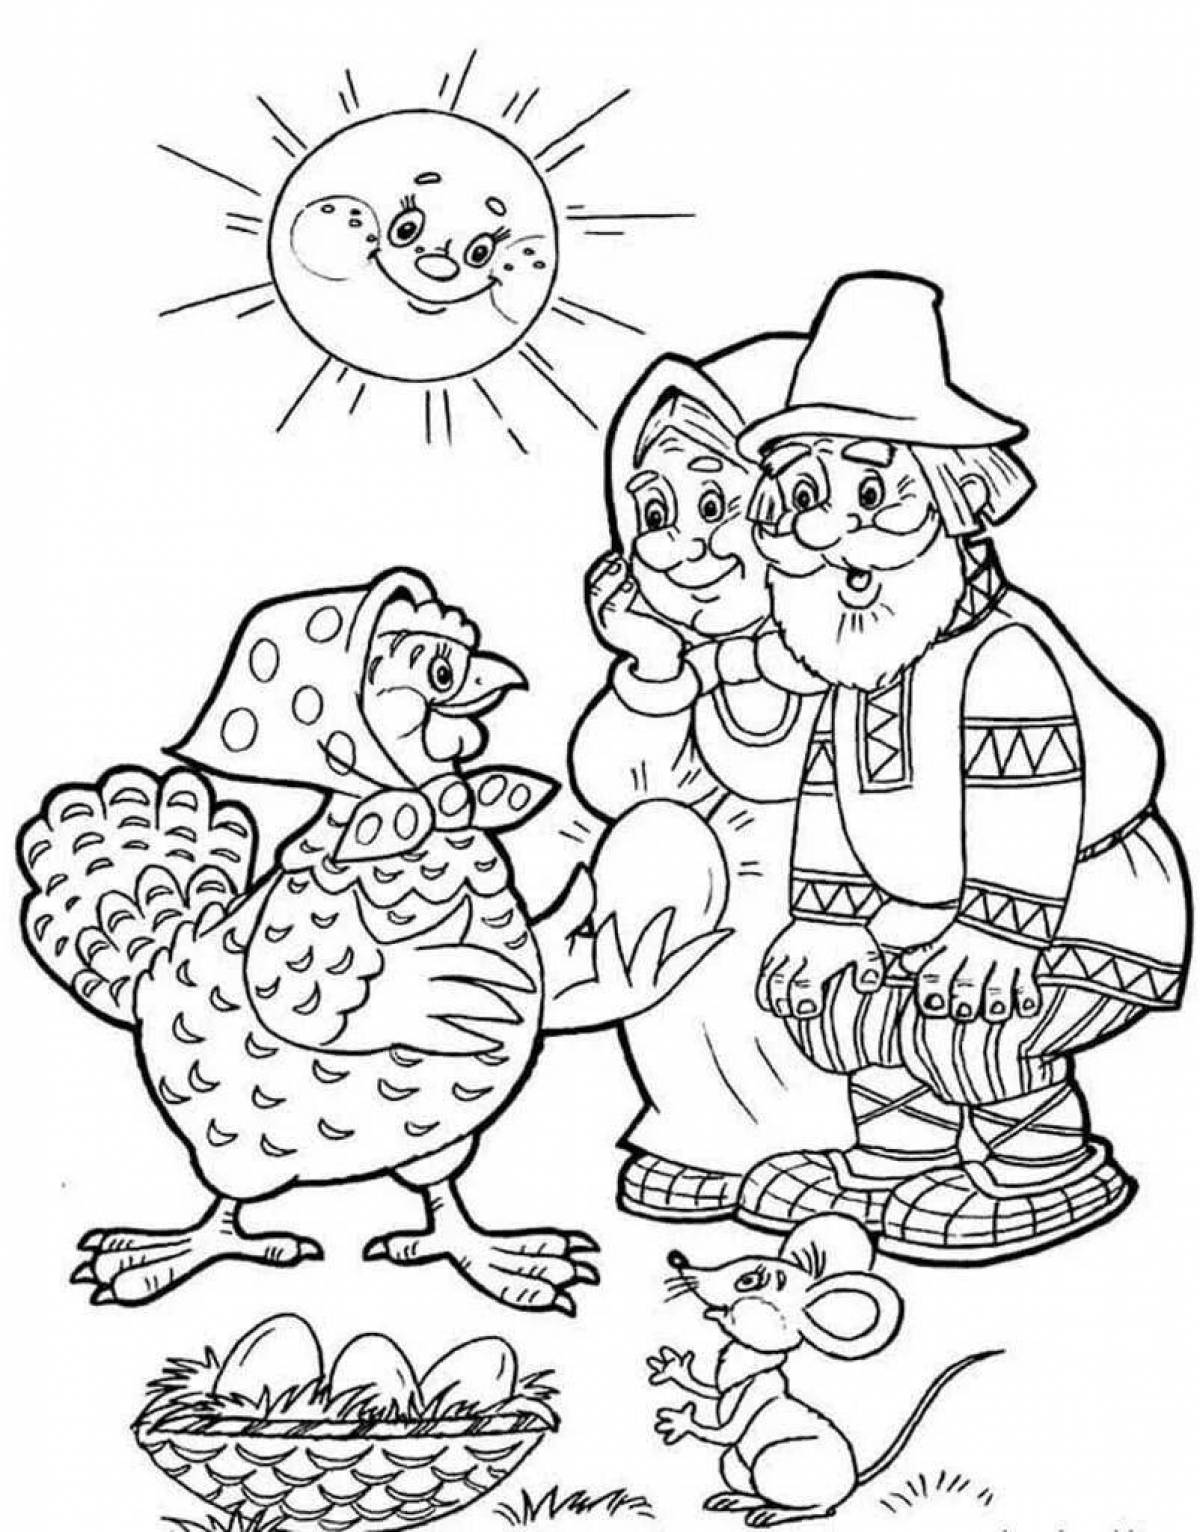 Creative chick pockmarked coloring for kids